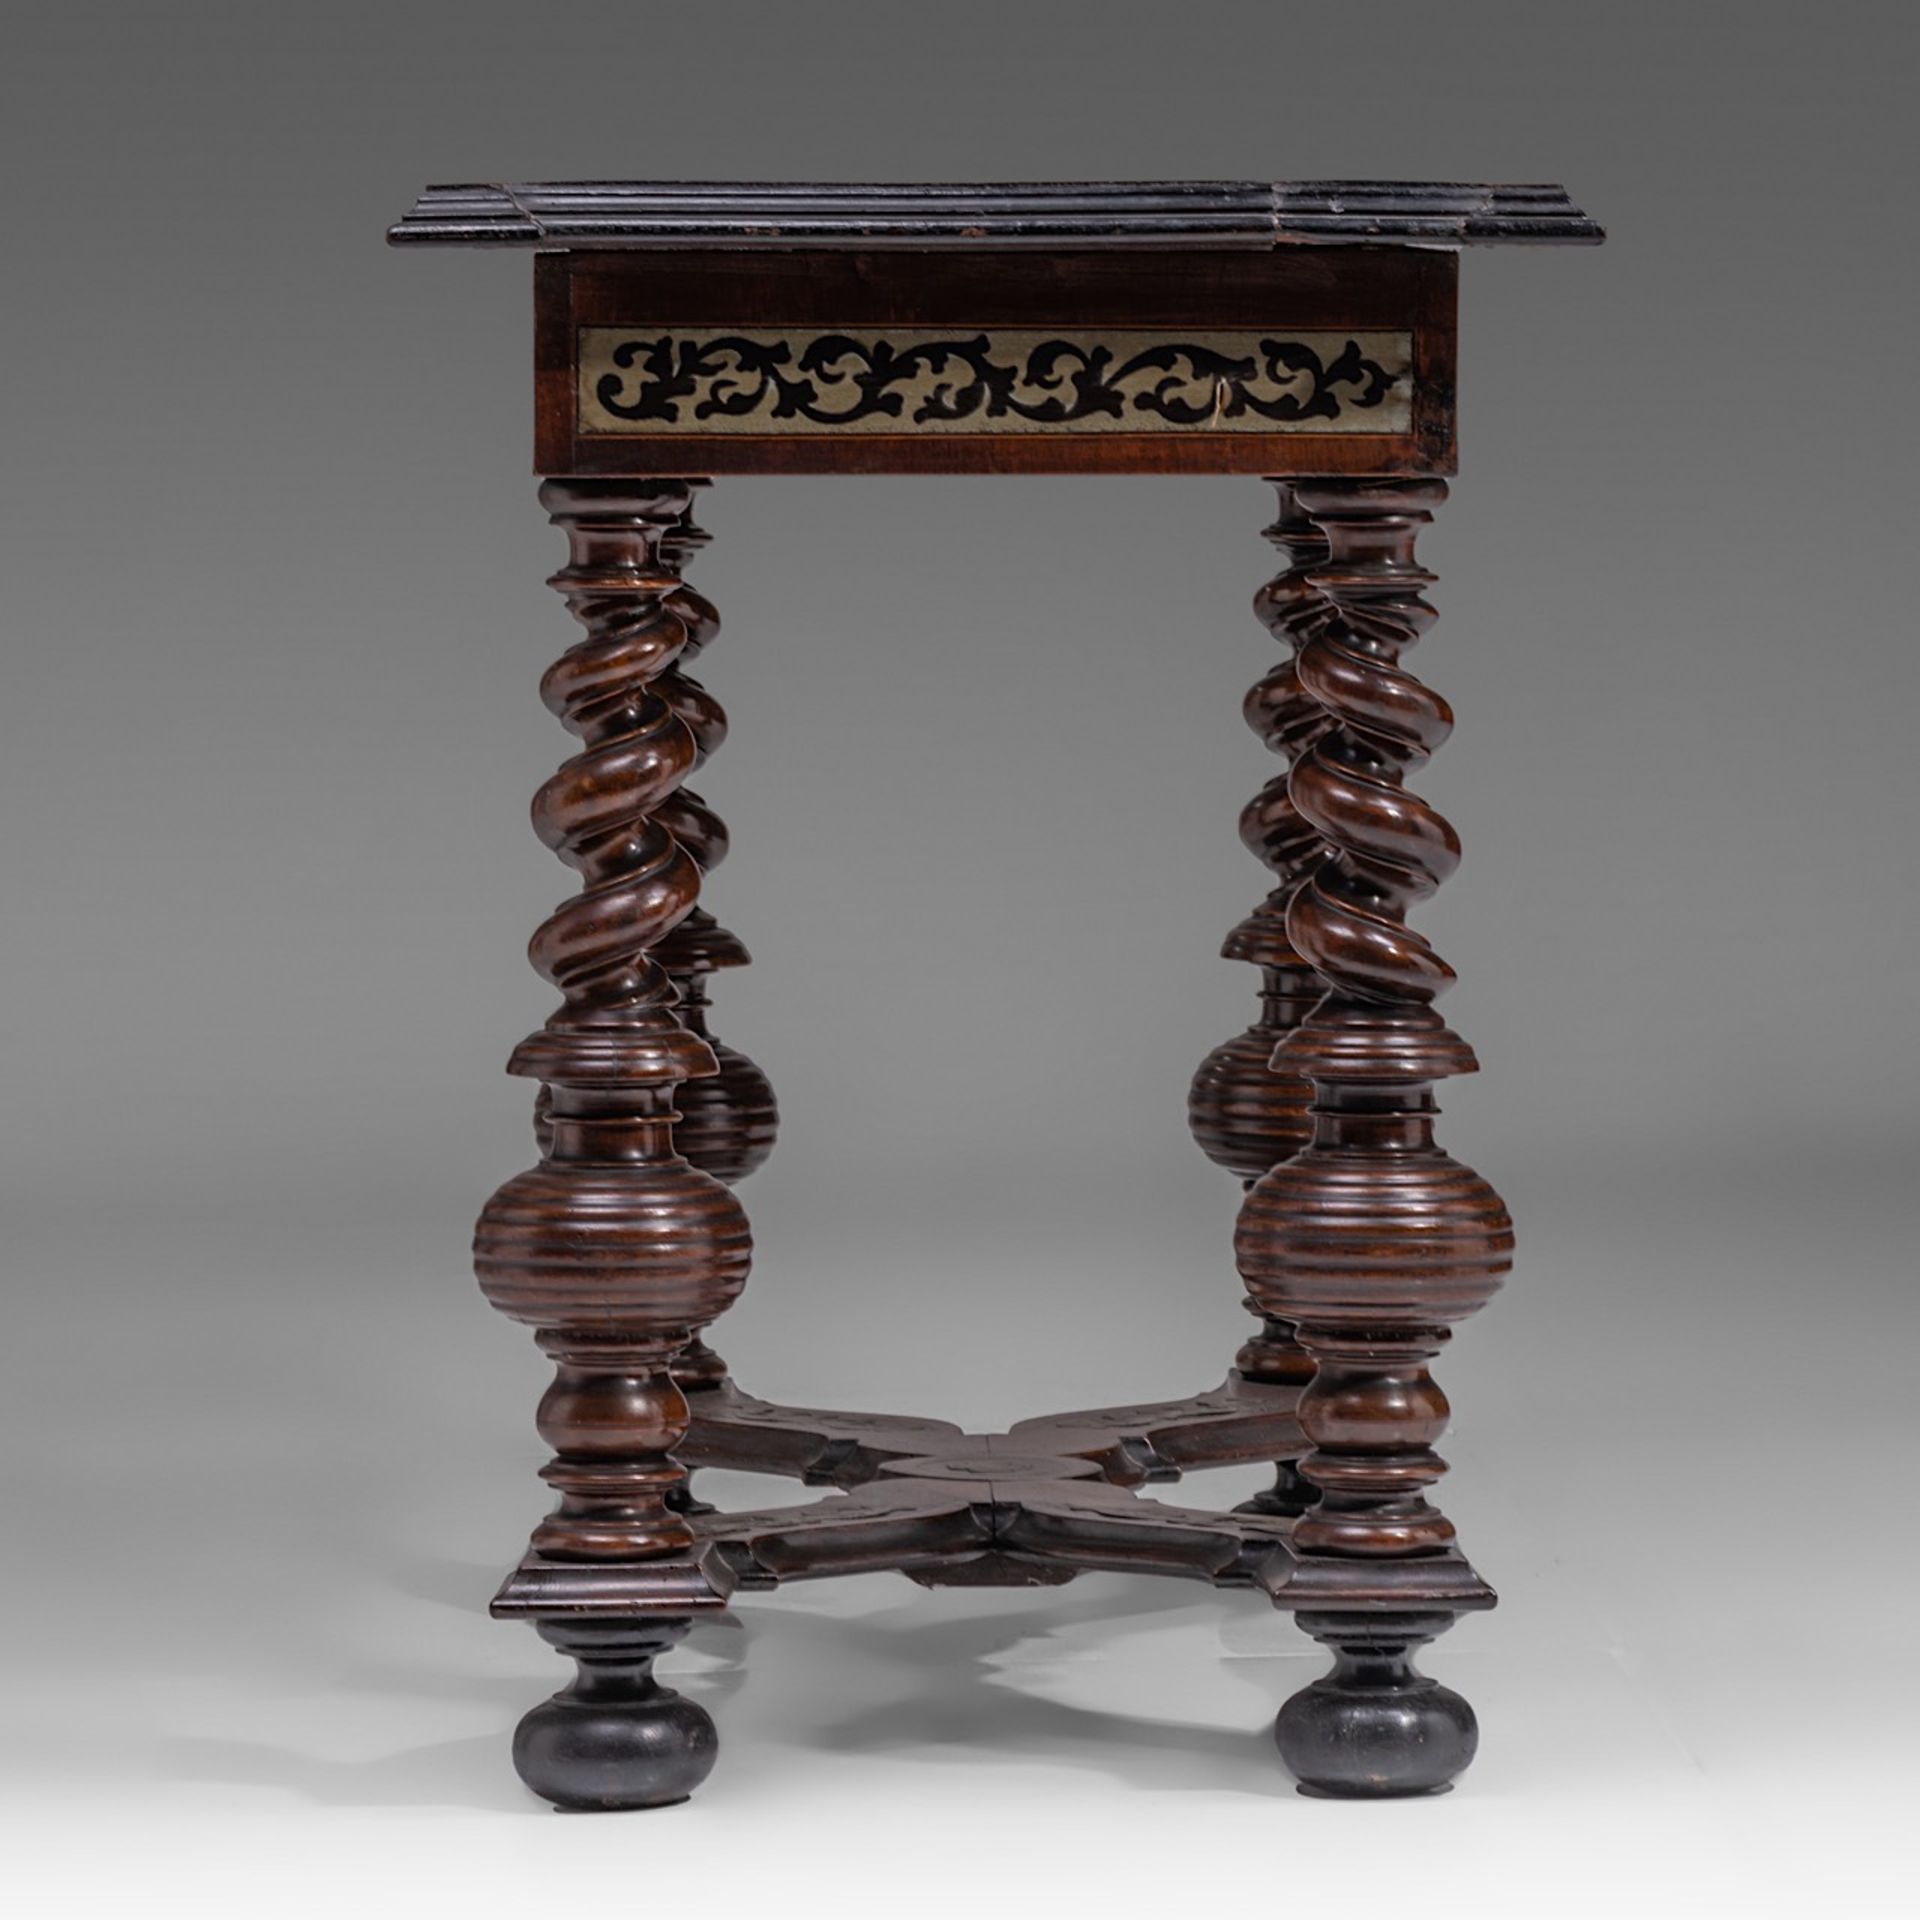 A fine Baroque rosewood and mahogany veneered centre table, 17thC, H 80 - W 105 - D 60 cm - Image 5 of 7